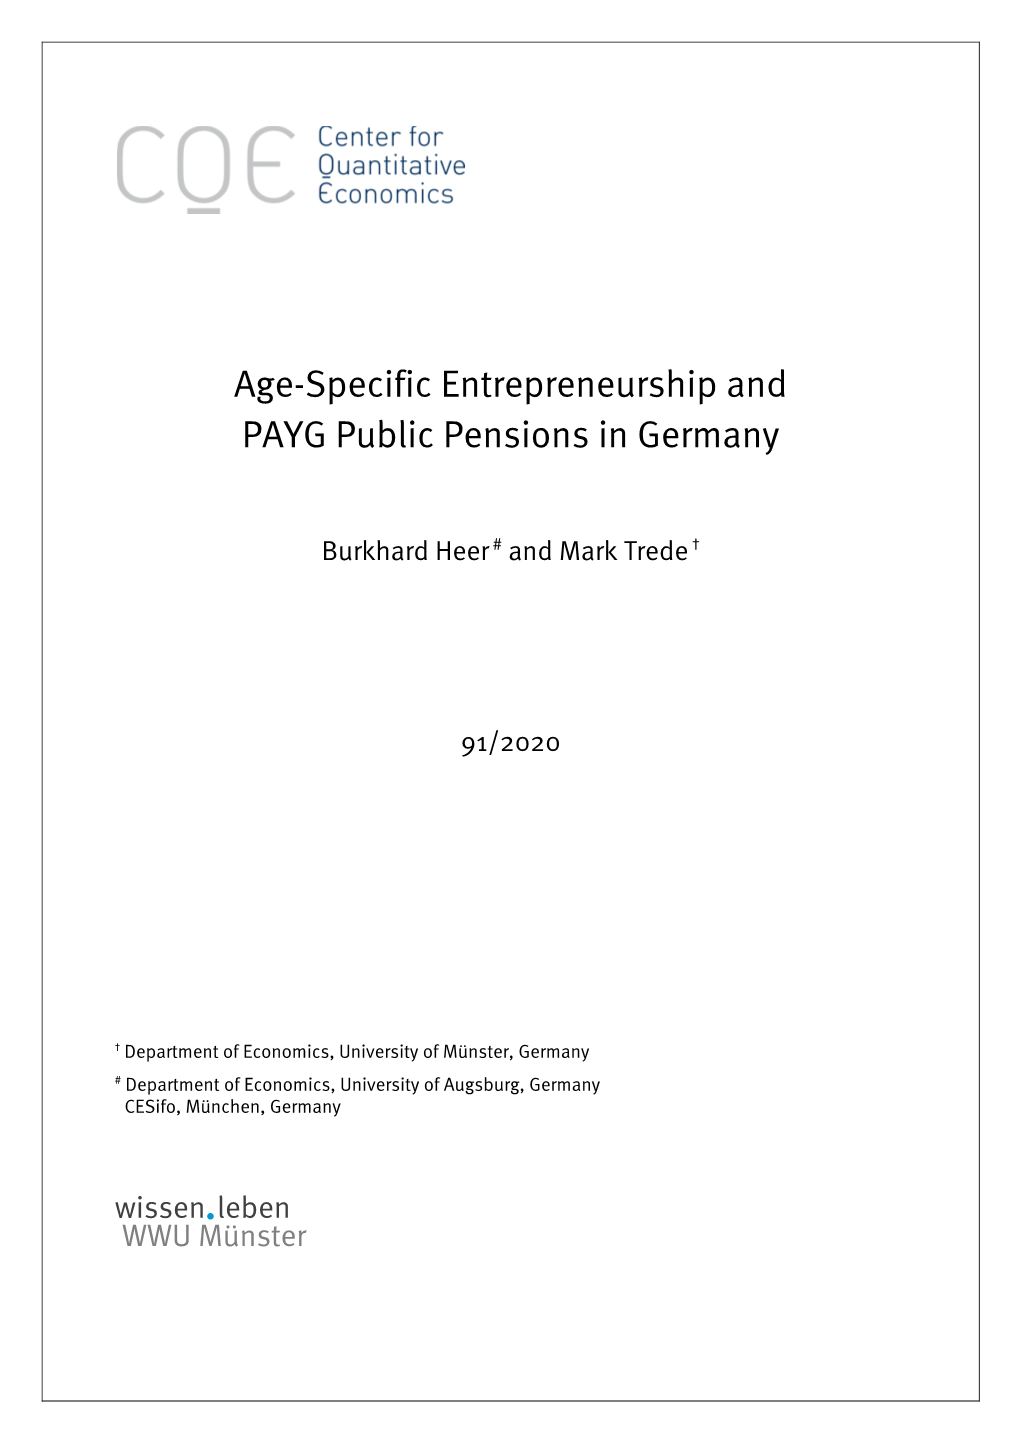 Age-Specific Entrepreneurship and PAYG Public Pensions in Germany